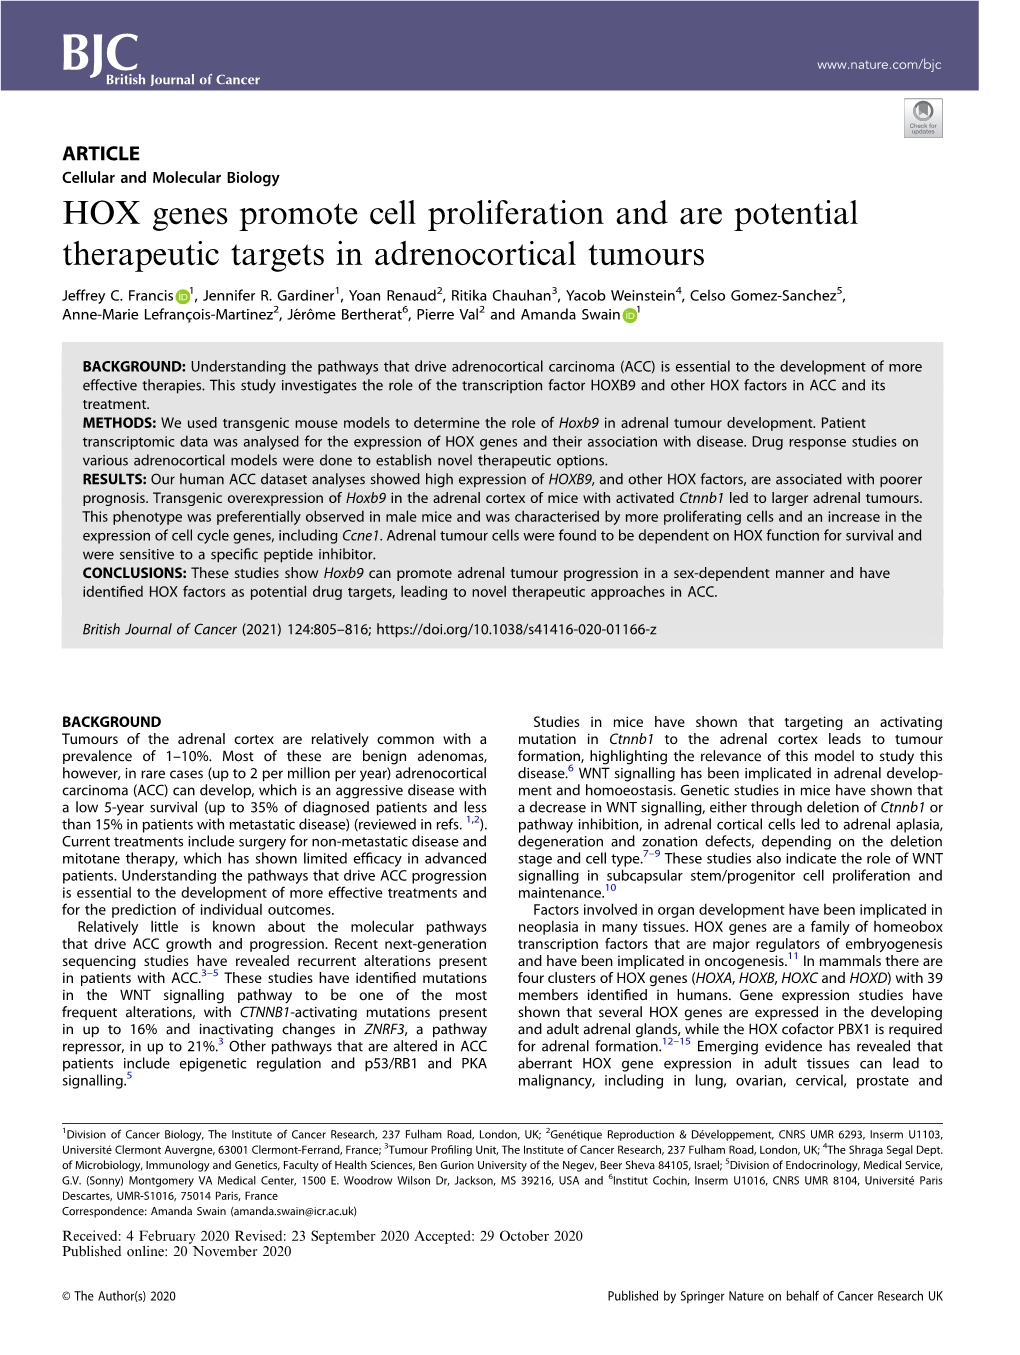 HOX Genes Promote Cell Proliferation and Are Potential Therapeutic Targets in Adrenocortical Tumours